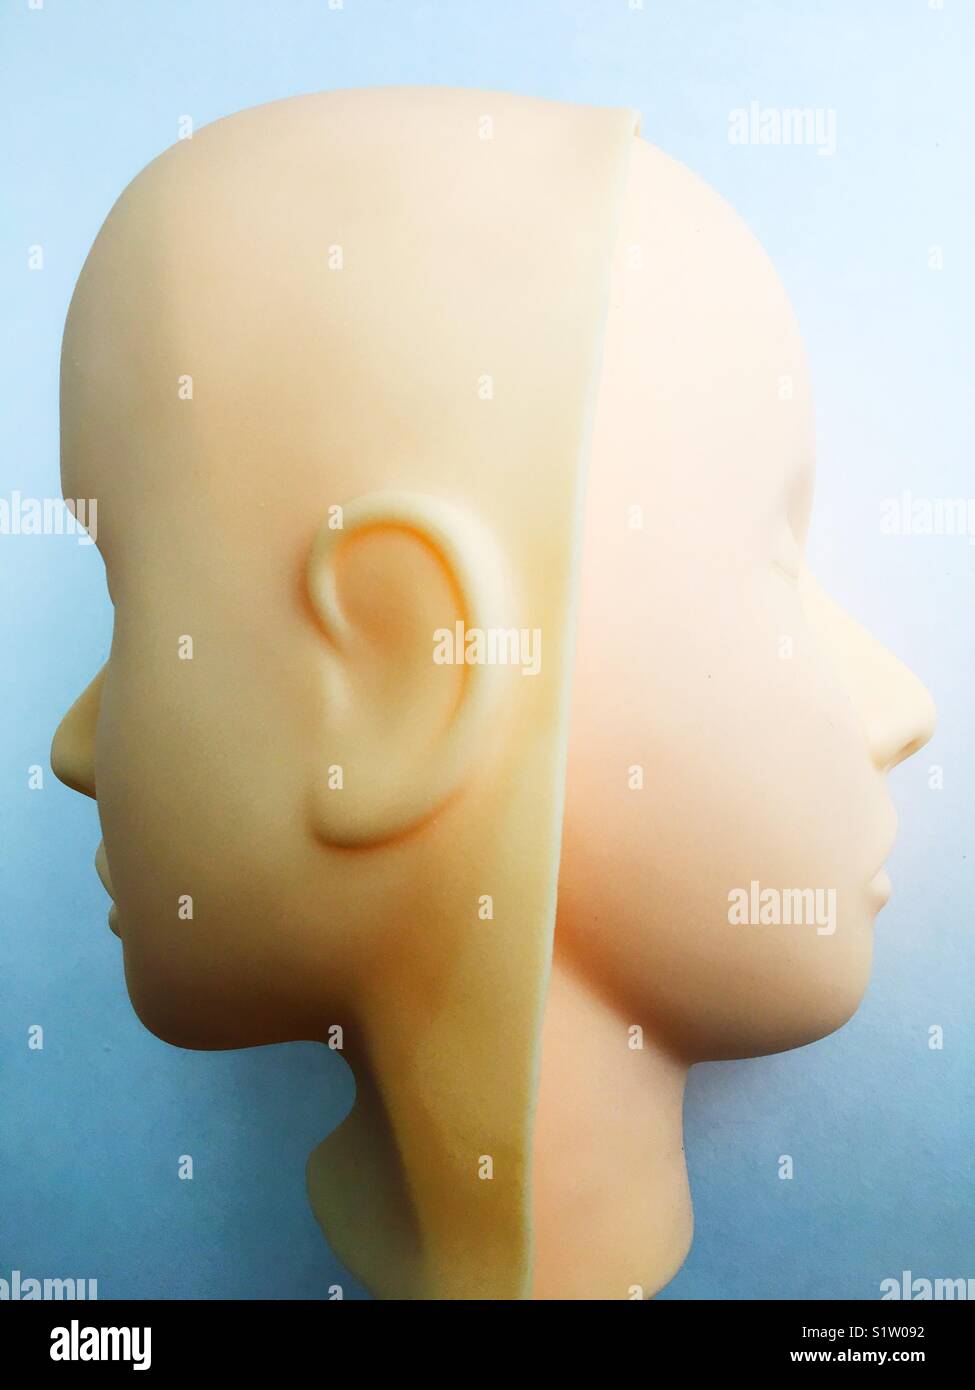 Two rubber faces, connected but facing opposite directions. Stock Photo